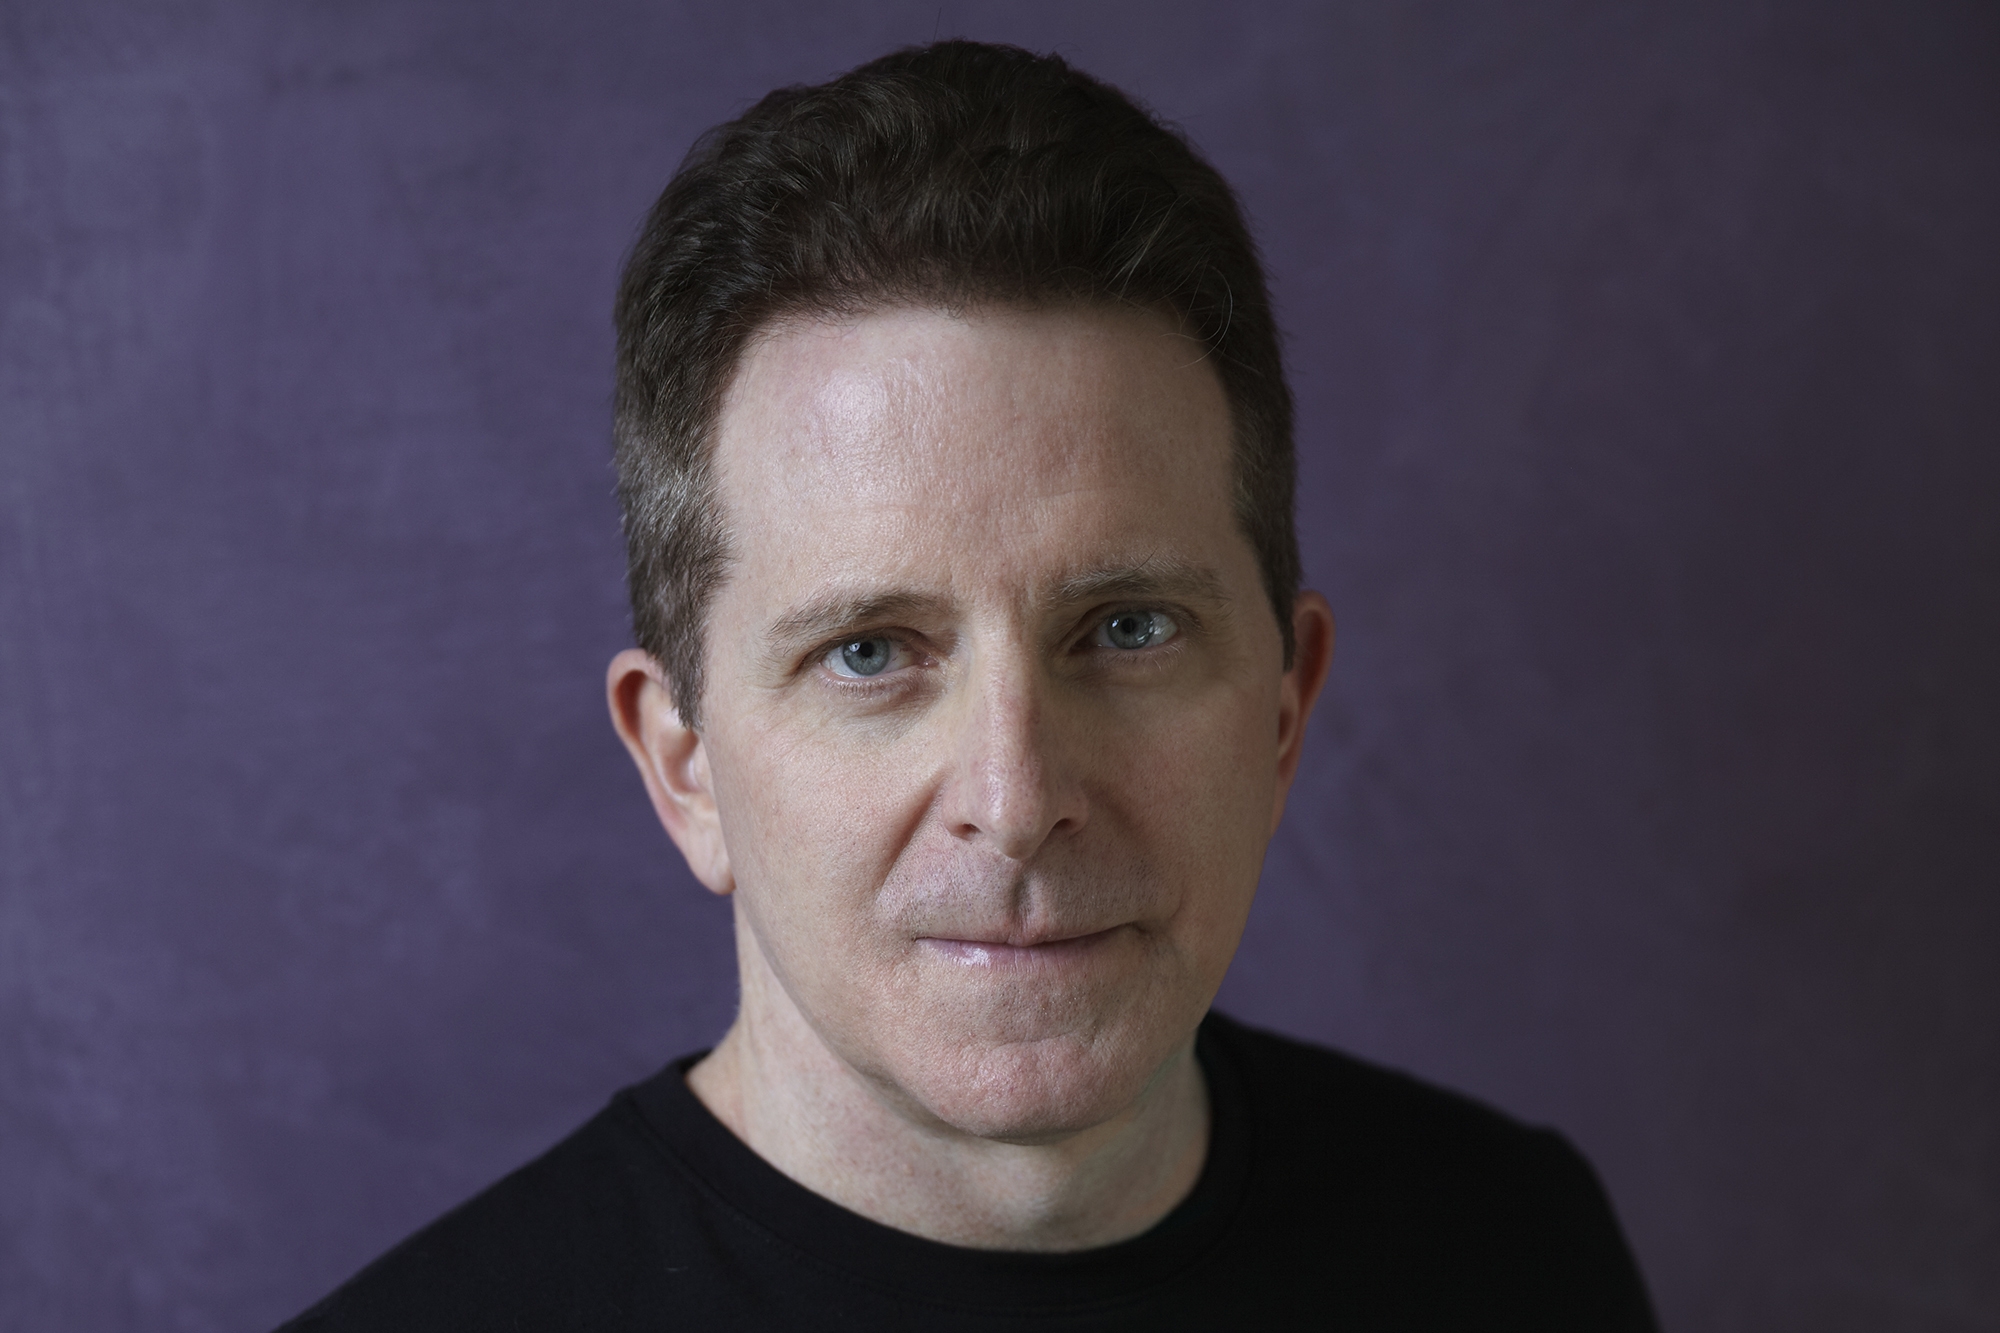 Amazon author Landon J. Napoleon stares into the camera. He has dark hair, blue eyes, and is wearing a black sweater. The background is purple. 